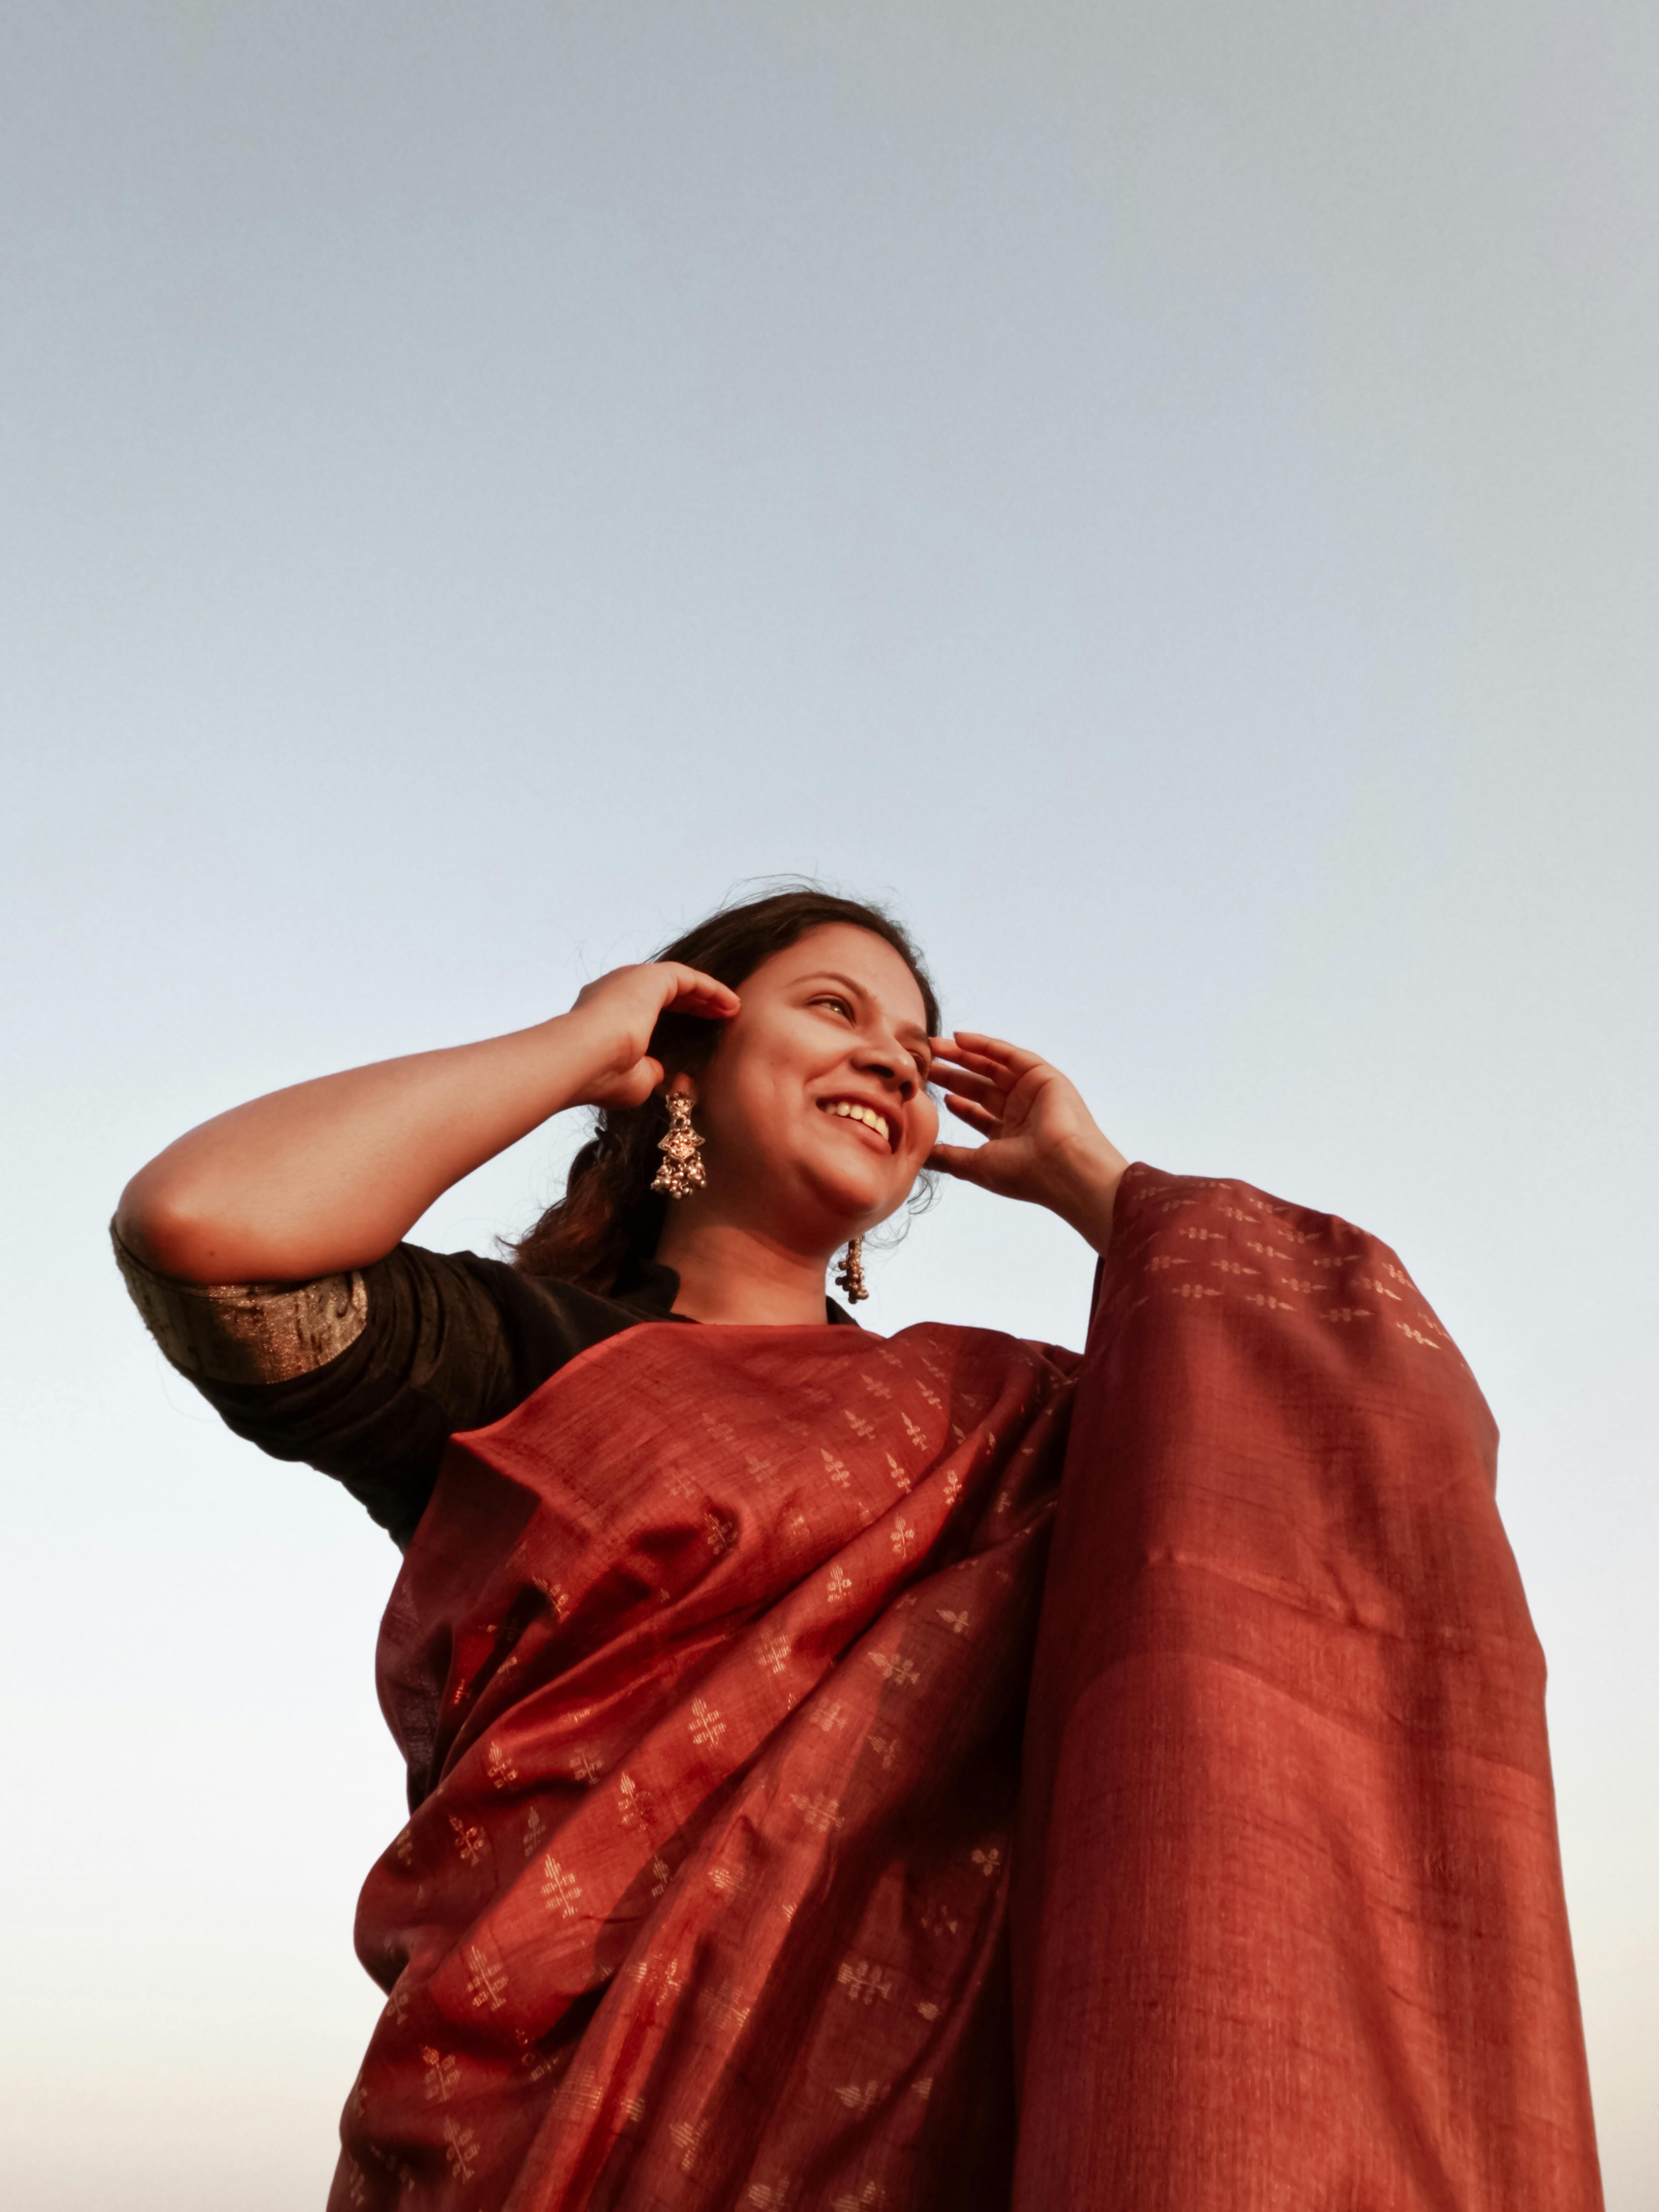 https://images.pexels.com/photos/18040691/pexels-photo-18040691/free-photo-of-a-woman-wearing-a-saree-and-smiling.jpeg